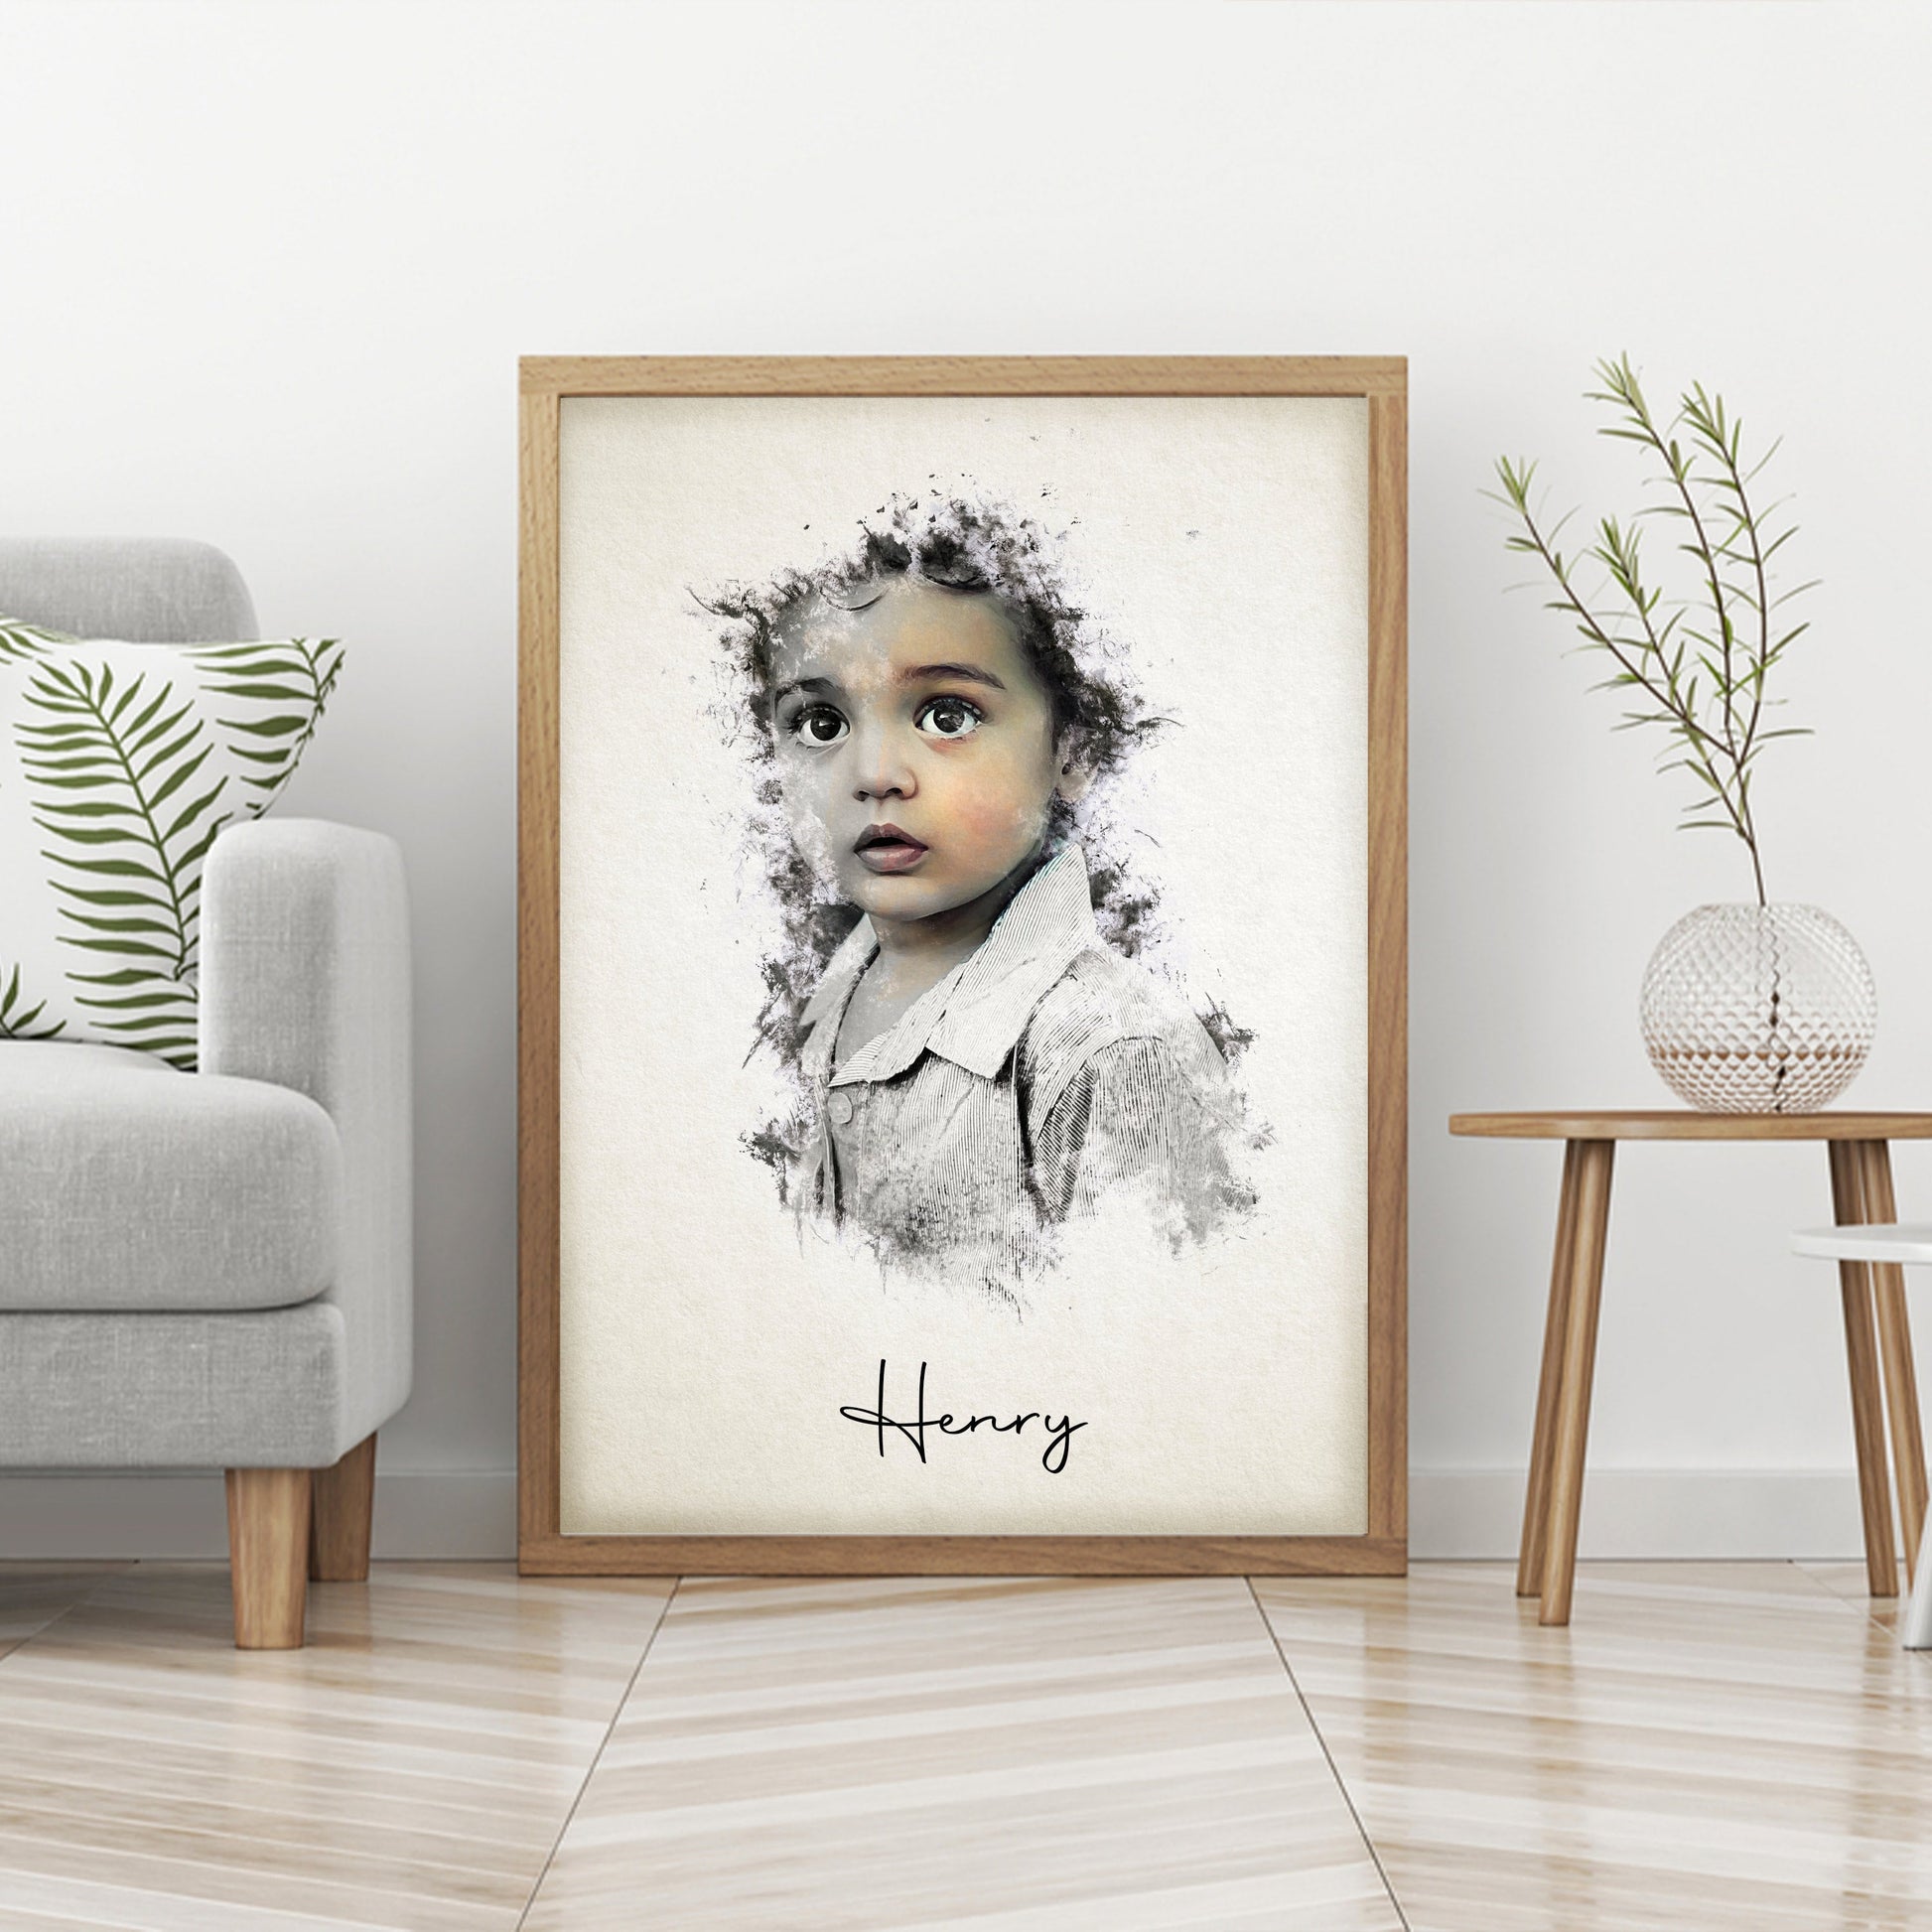 "Personalized baby portrait on wall in framed canvas at shower-child portrait